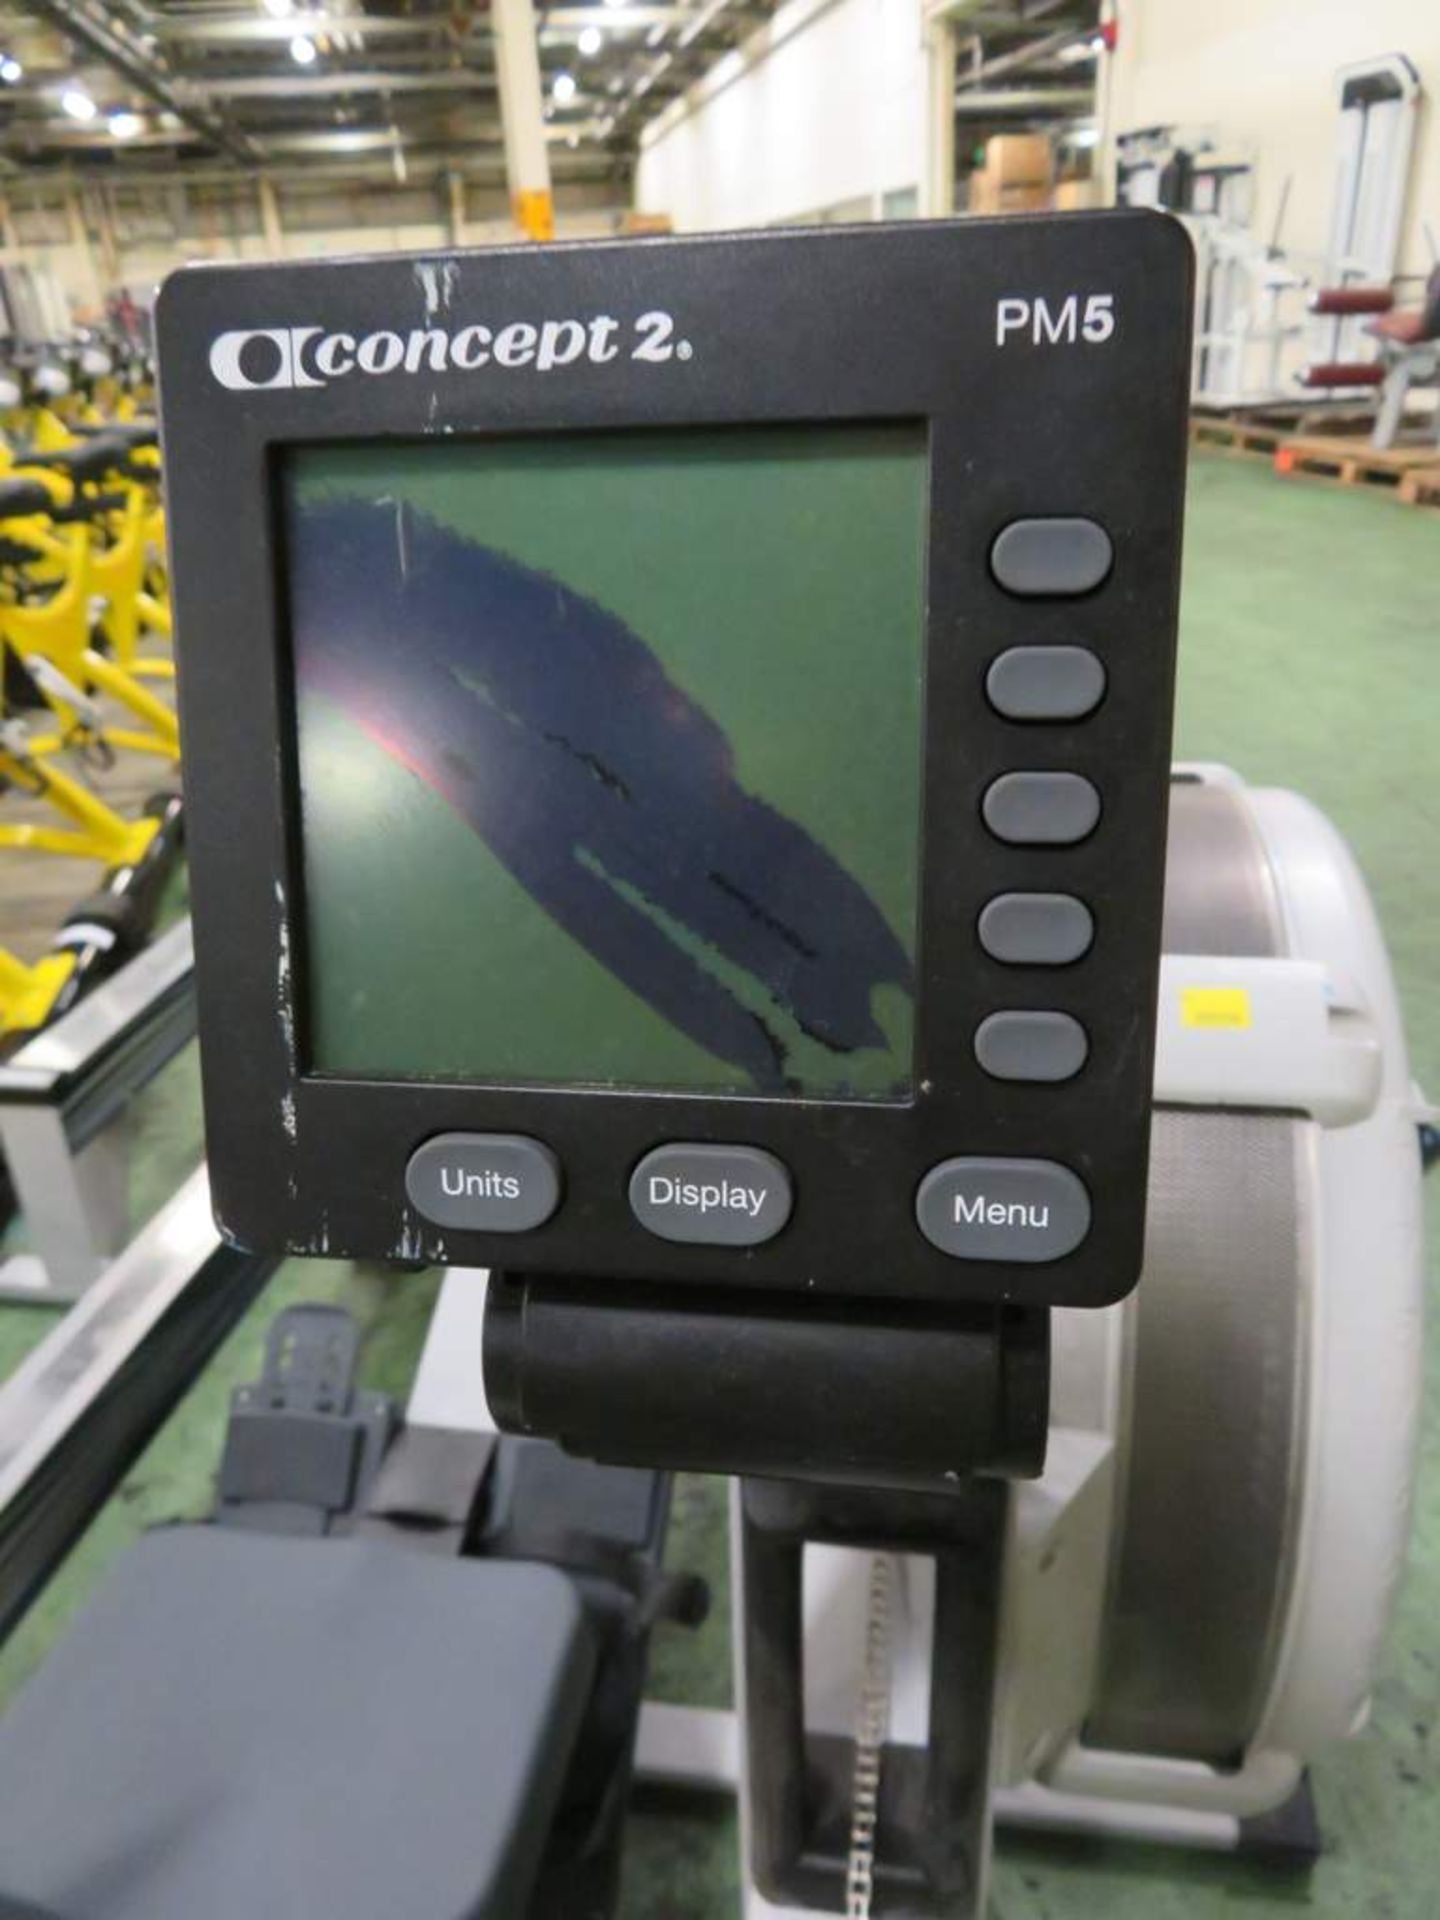 Concept 2 Indoor Rowing Machine, Model D, Complete With PM5 Display Console (Damaged Screen). - Image 4 of 6